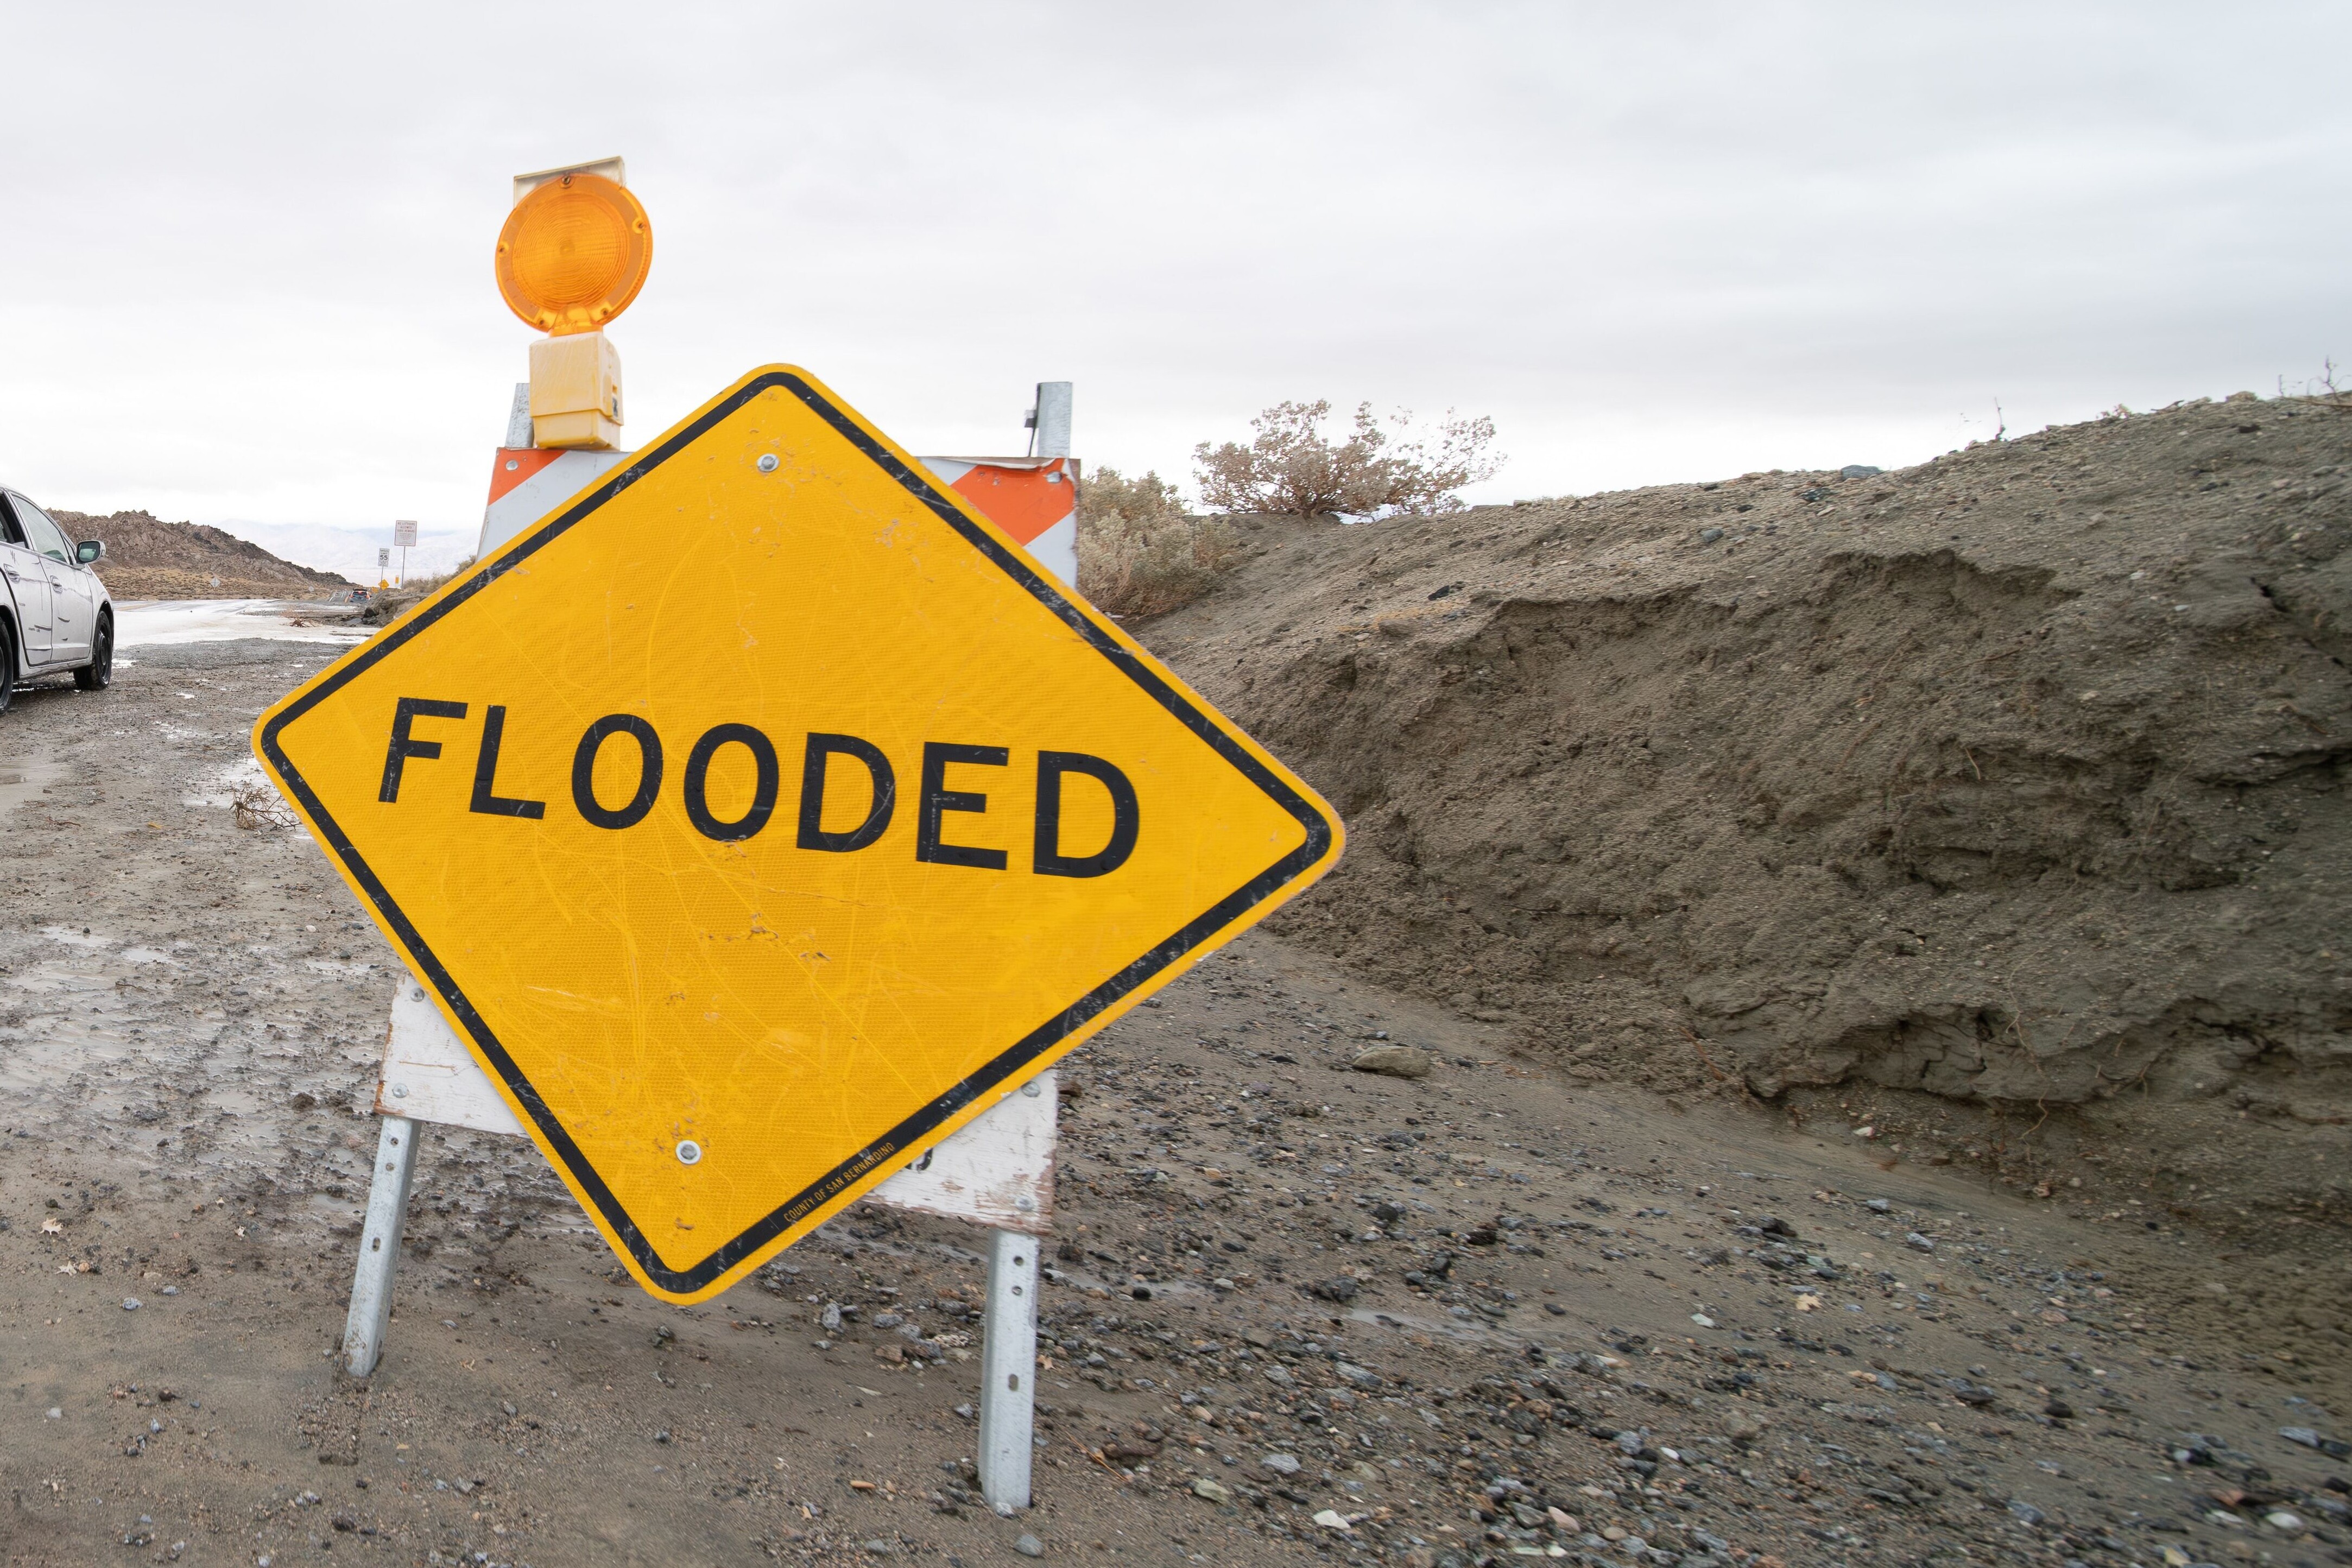 Road sign warning of flooded area